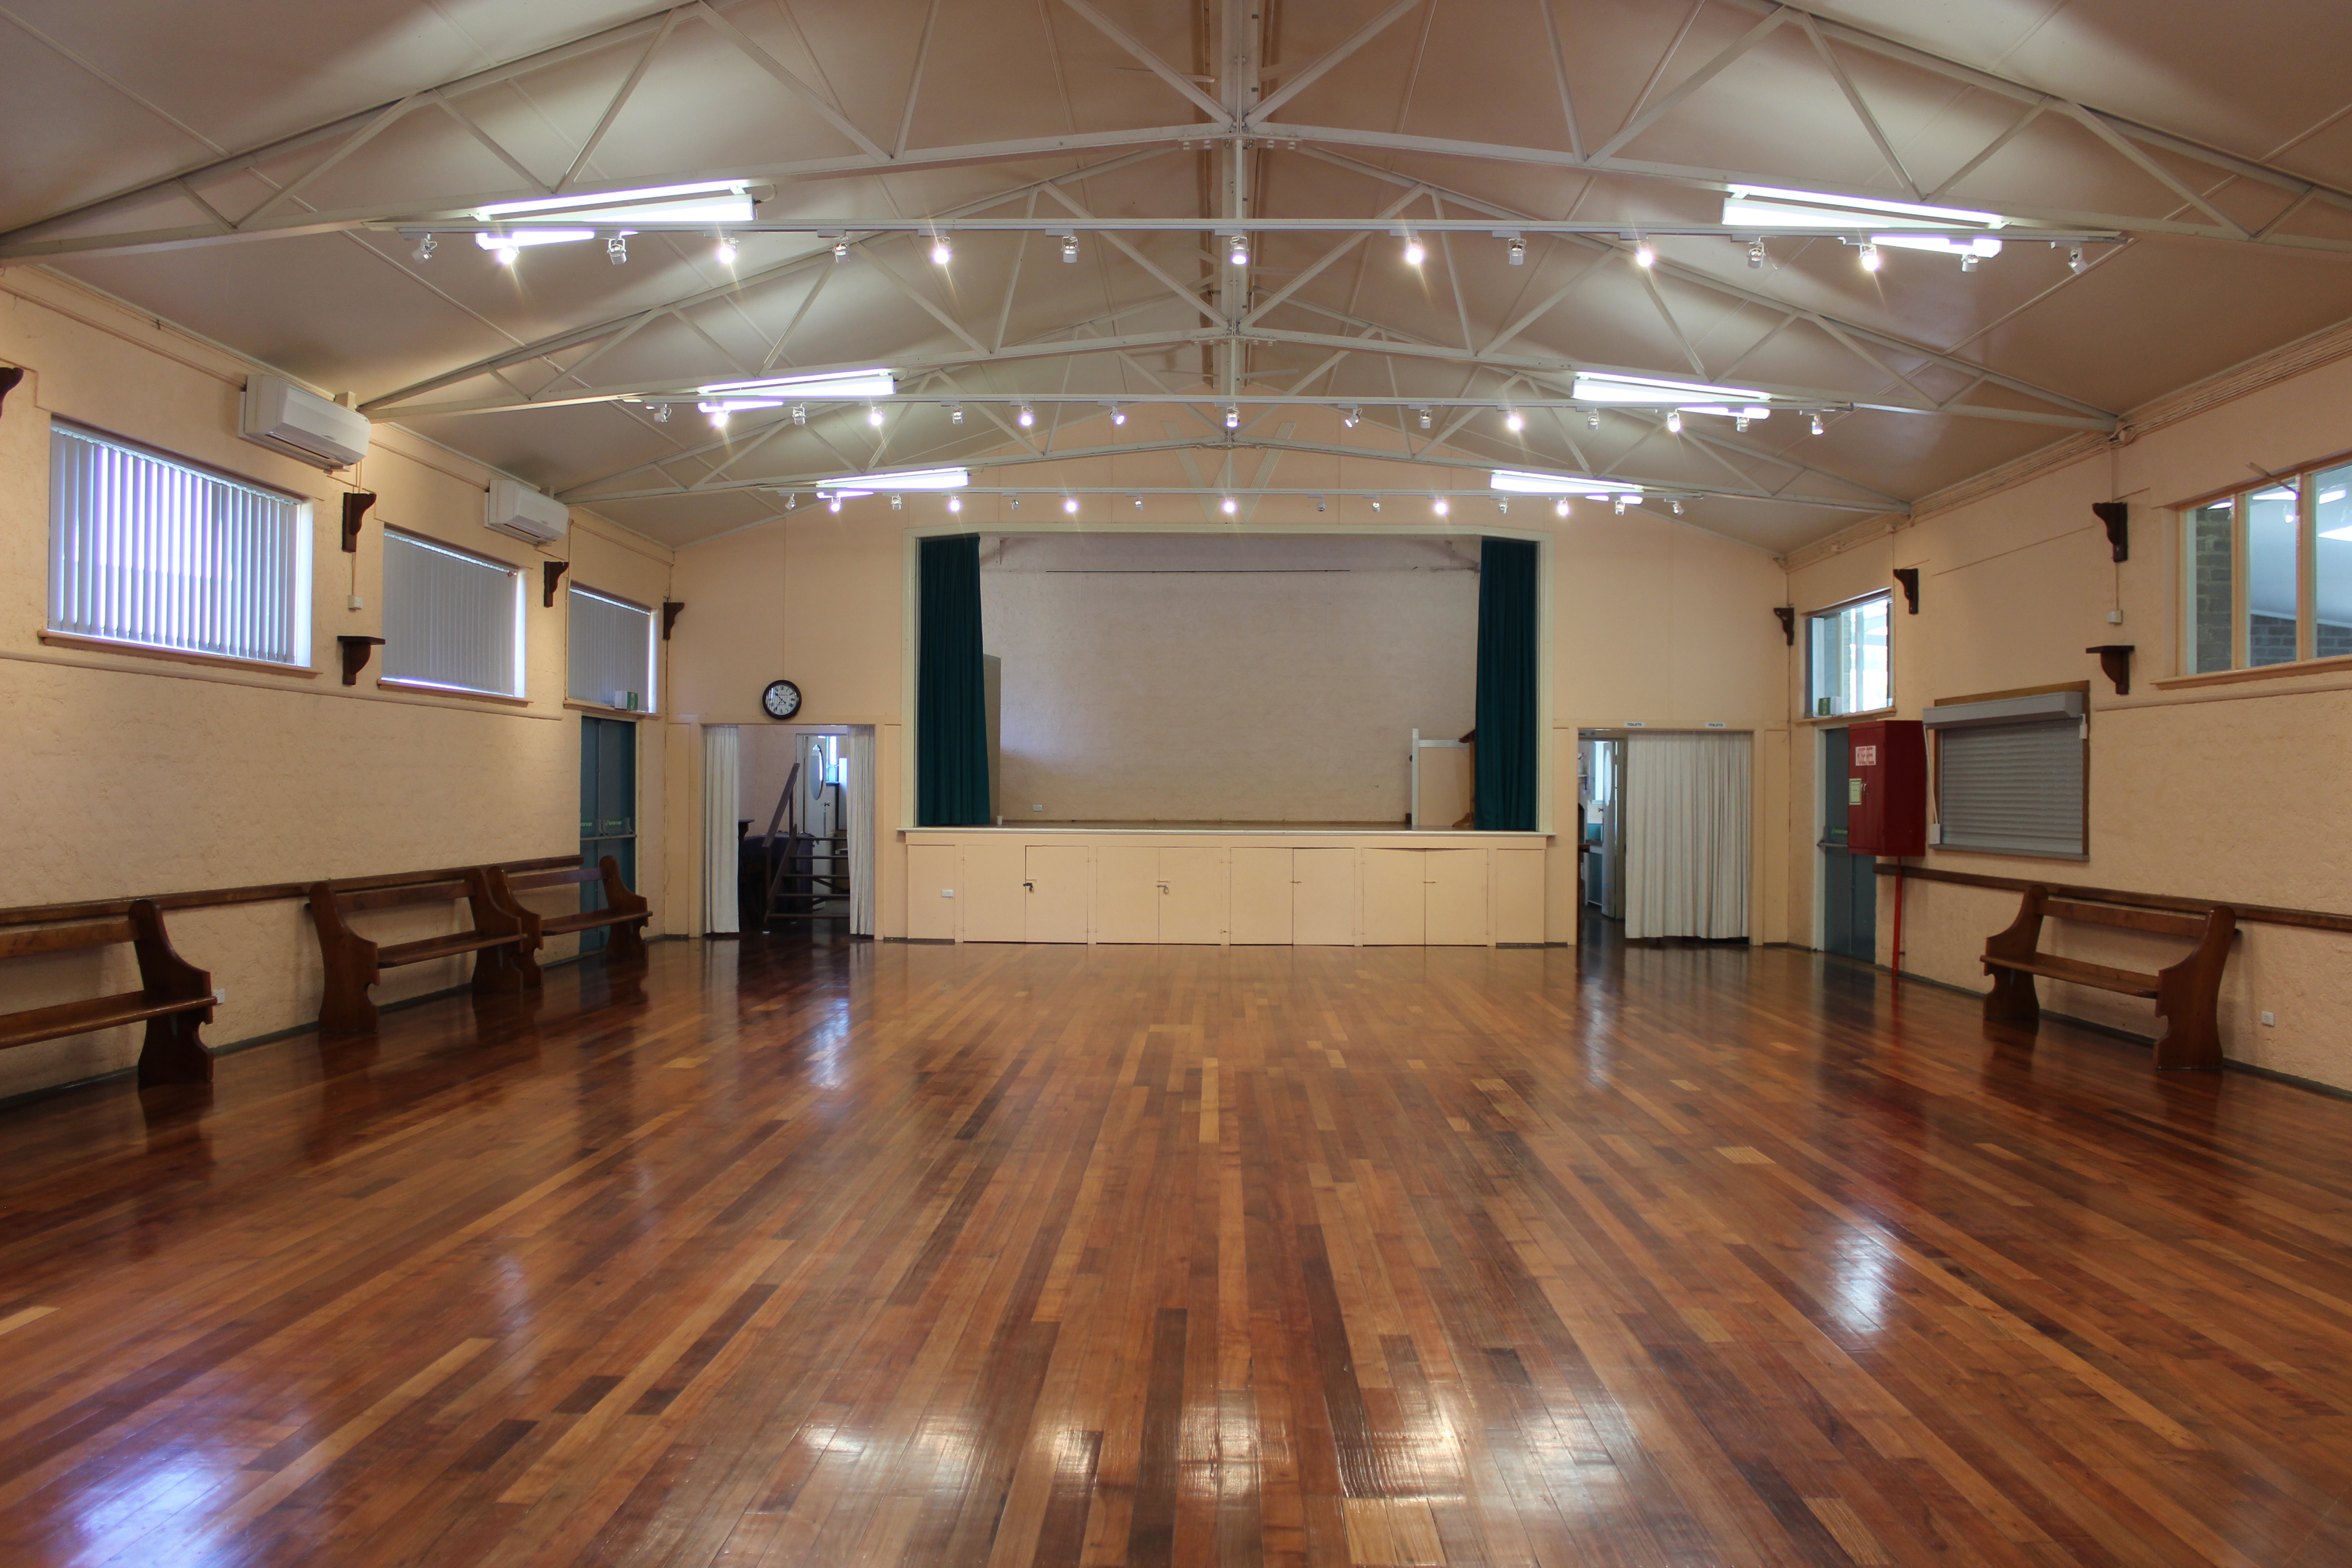 Beautifully furbished main hall with front stage area